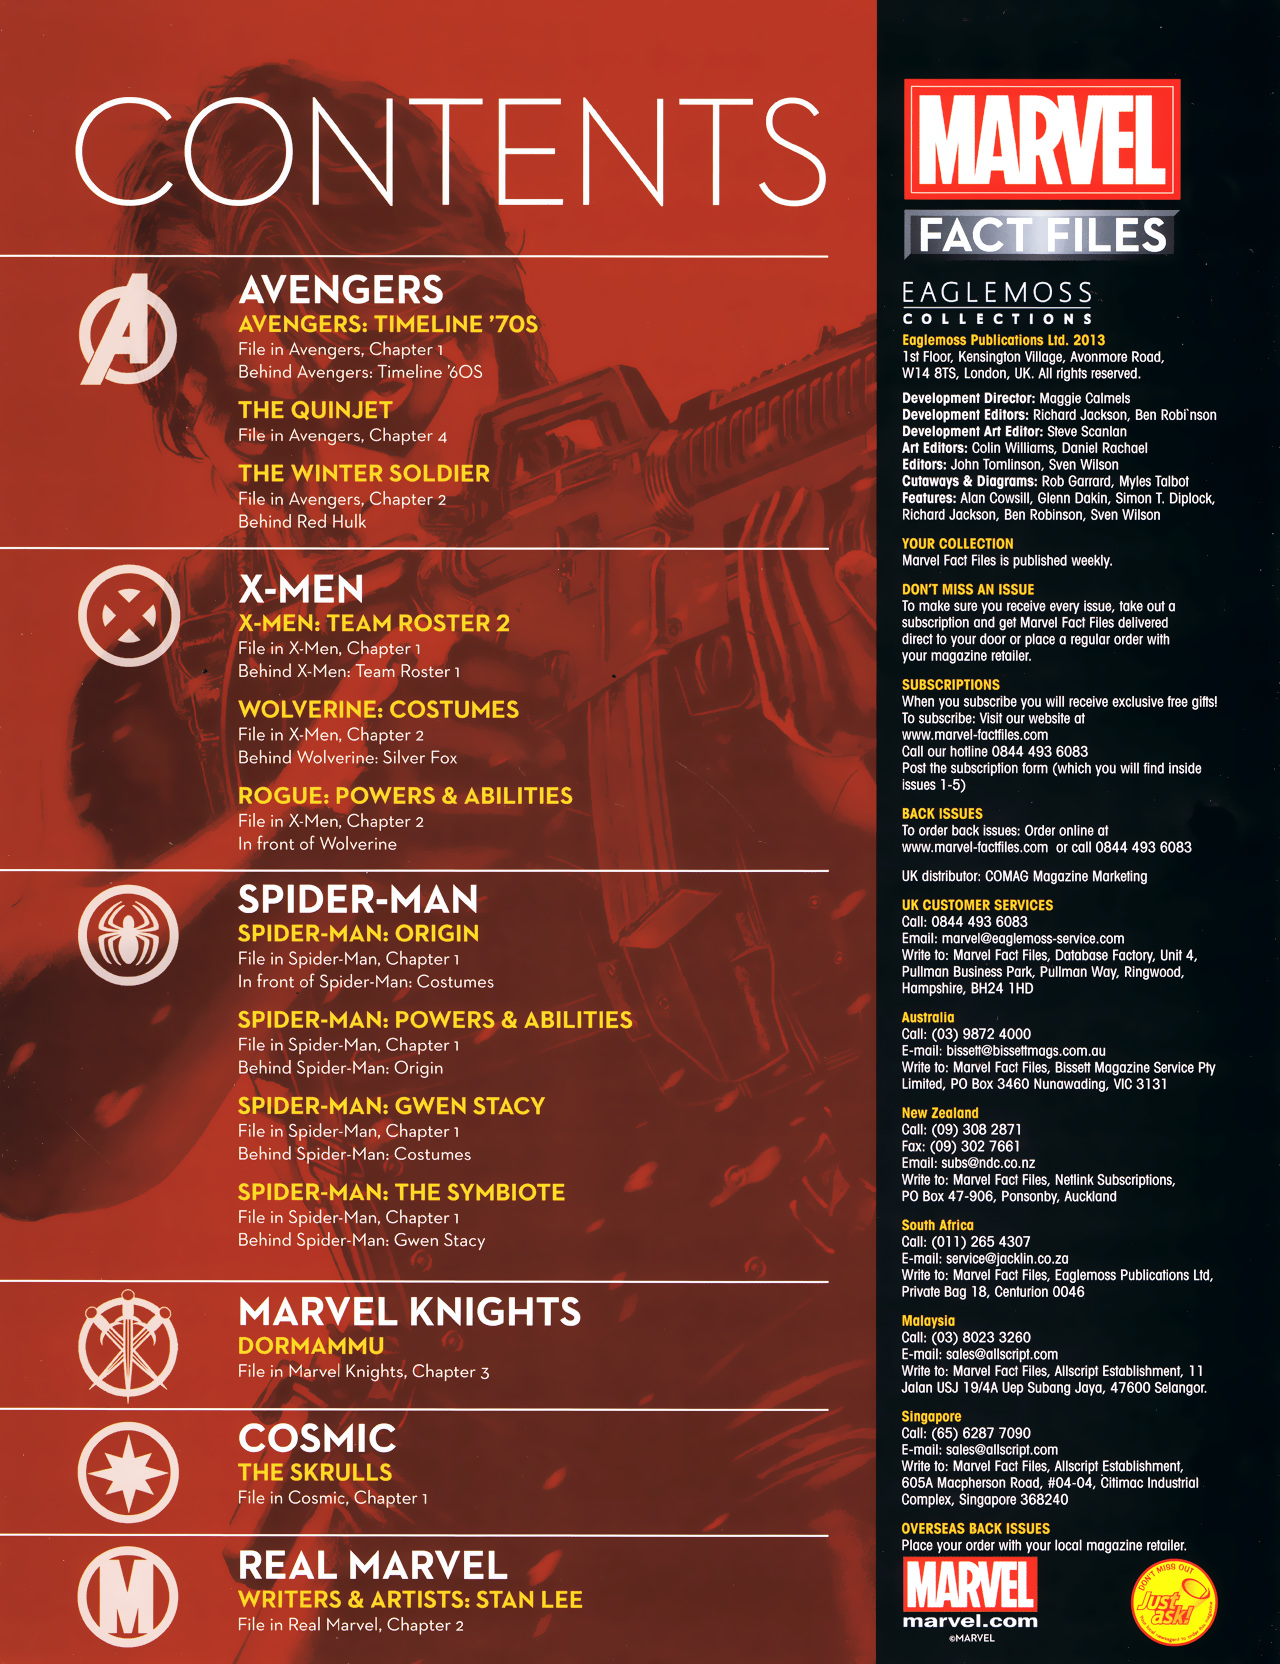 Read online Marvel Fact Files comic -  Issue #2 - 2